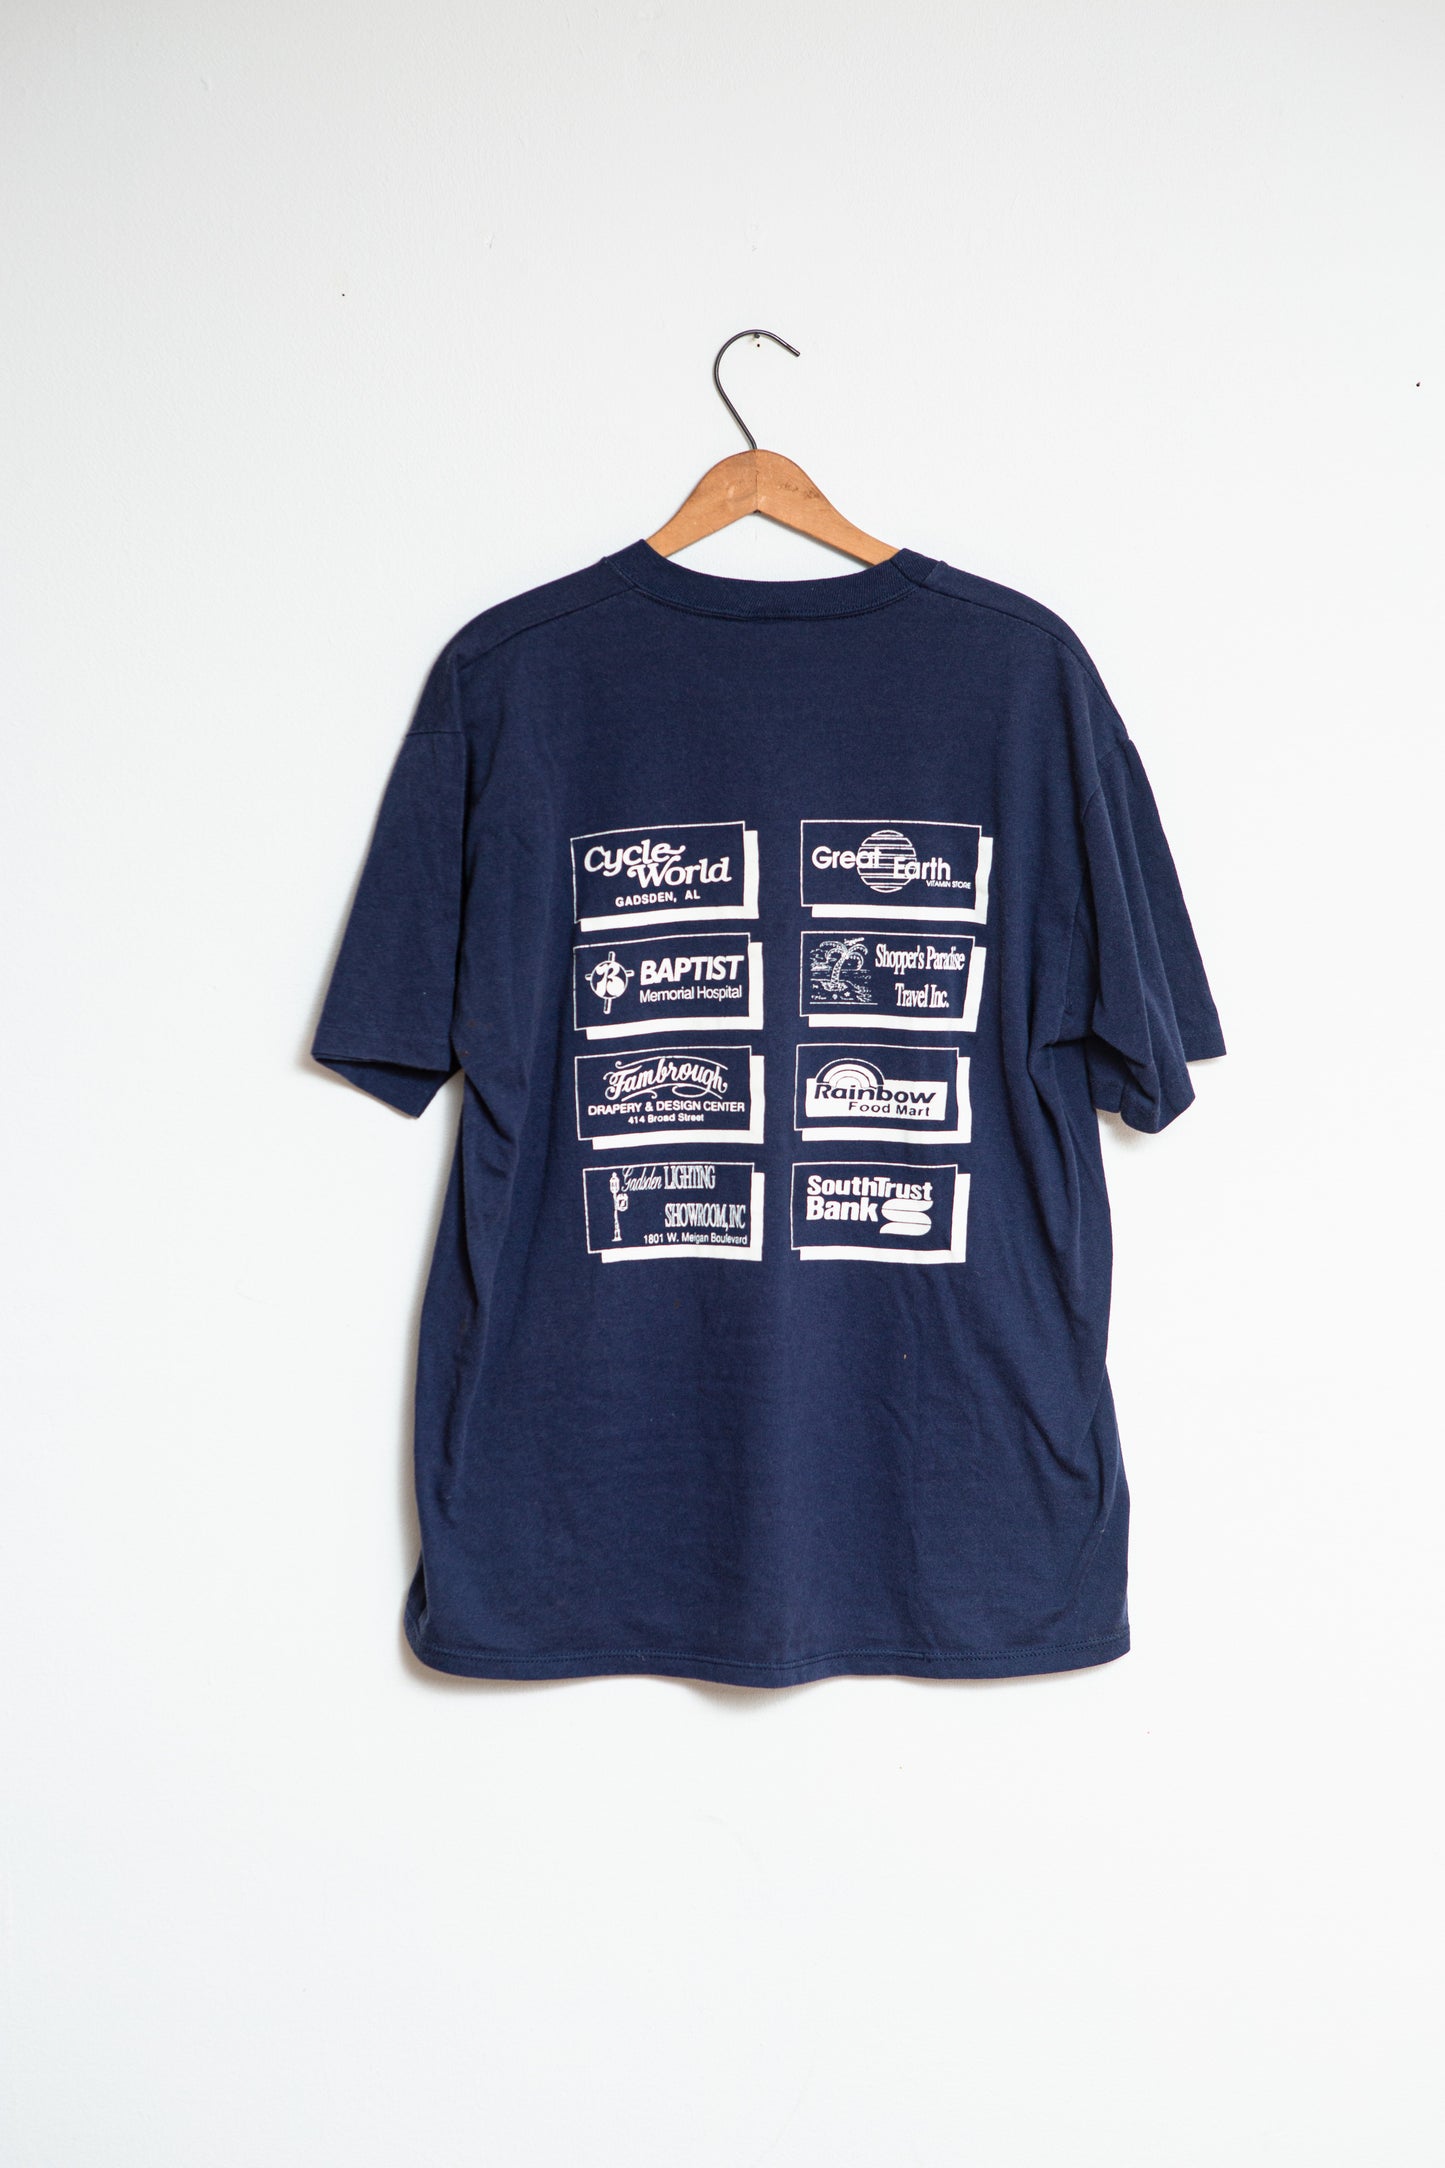 Vintage "Run for Glory" T-shirt